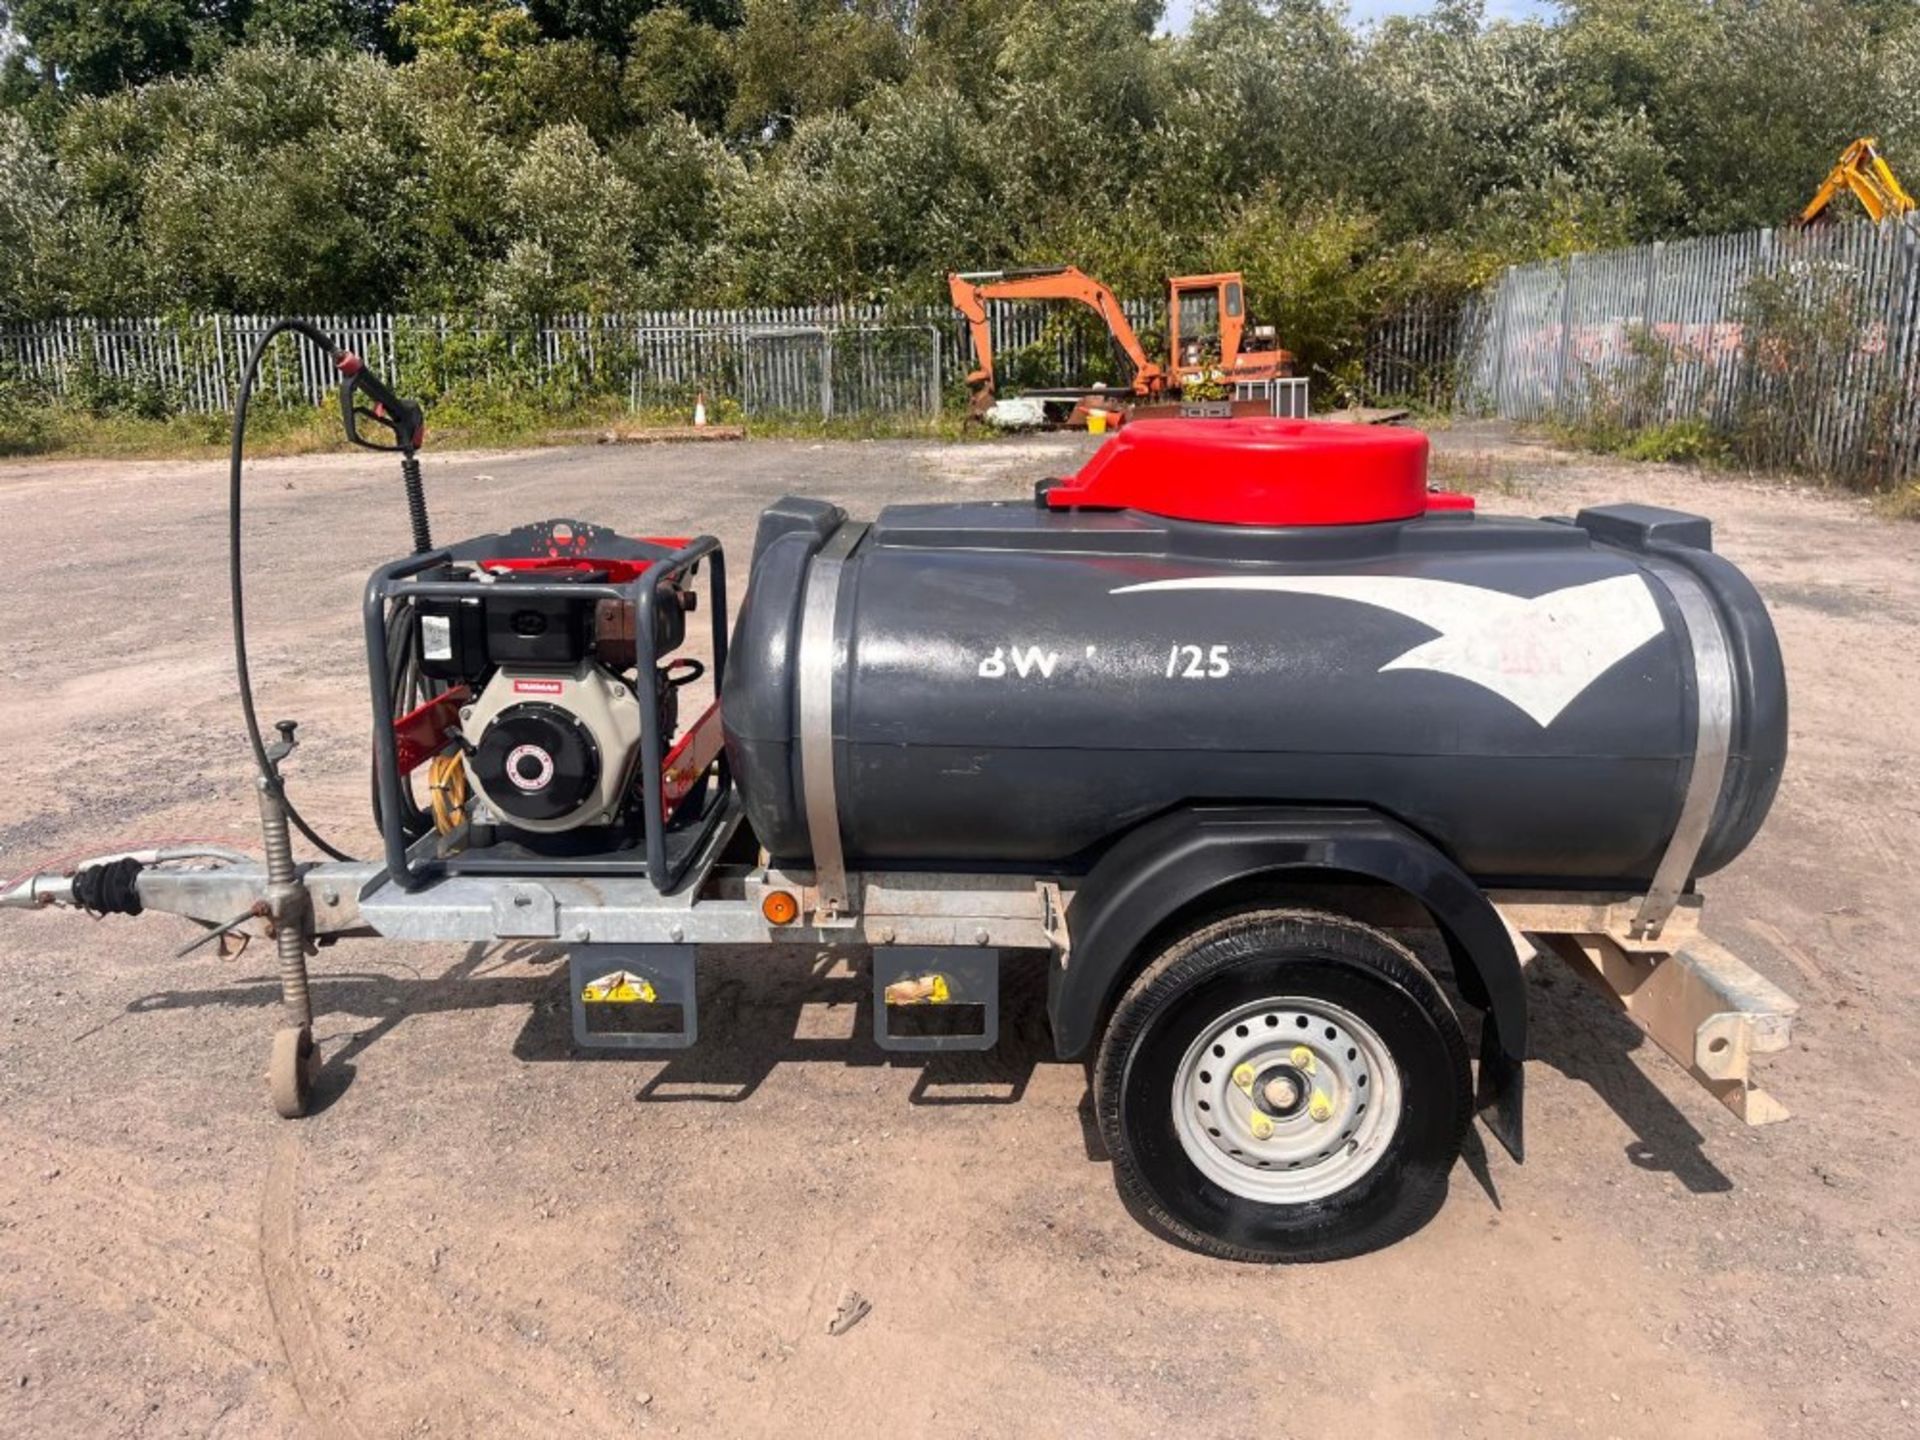 ALTRAD BELLE DIESEL WASHER BOWSER 250 GALLON. ELECTRIC START. YEAR 2020 - Image 4 of 11